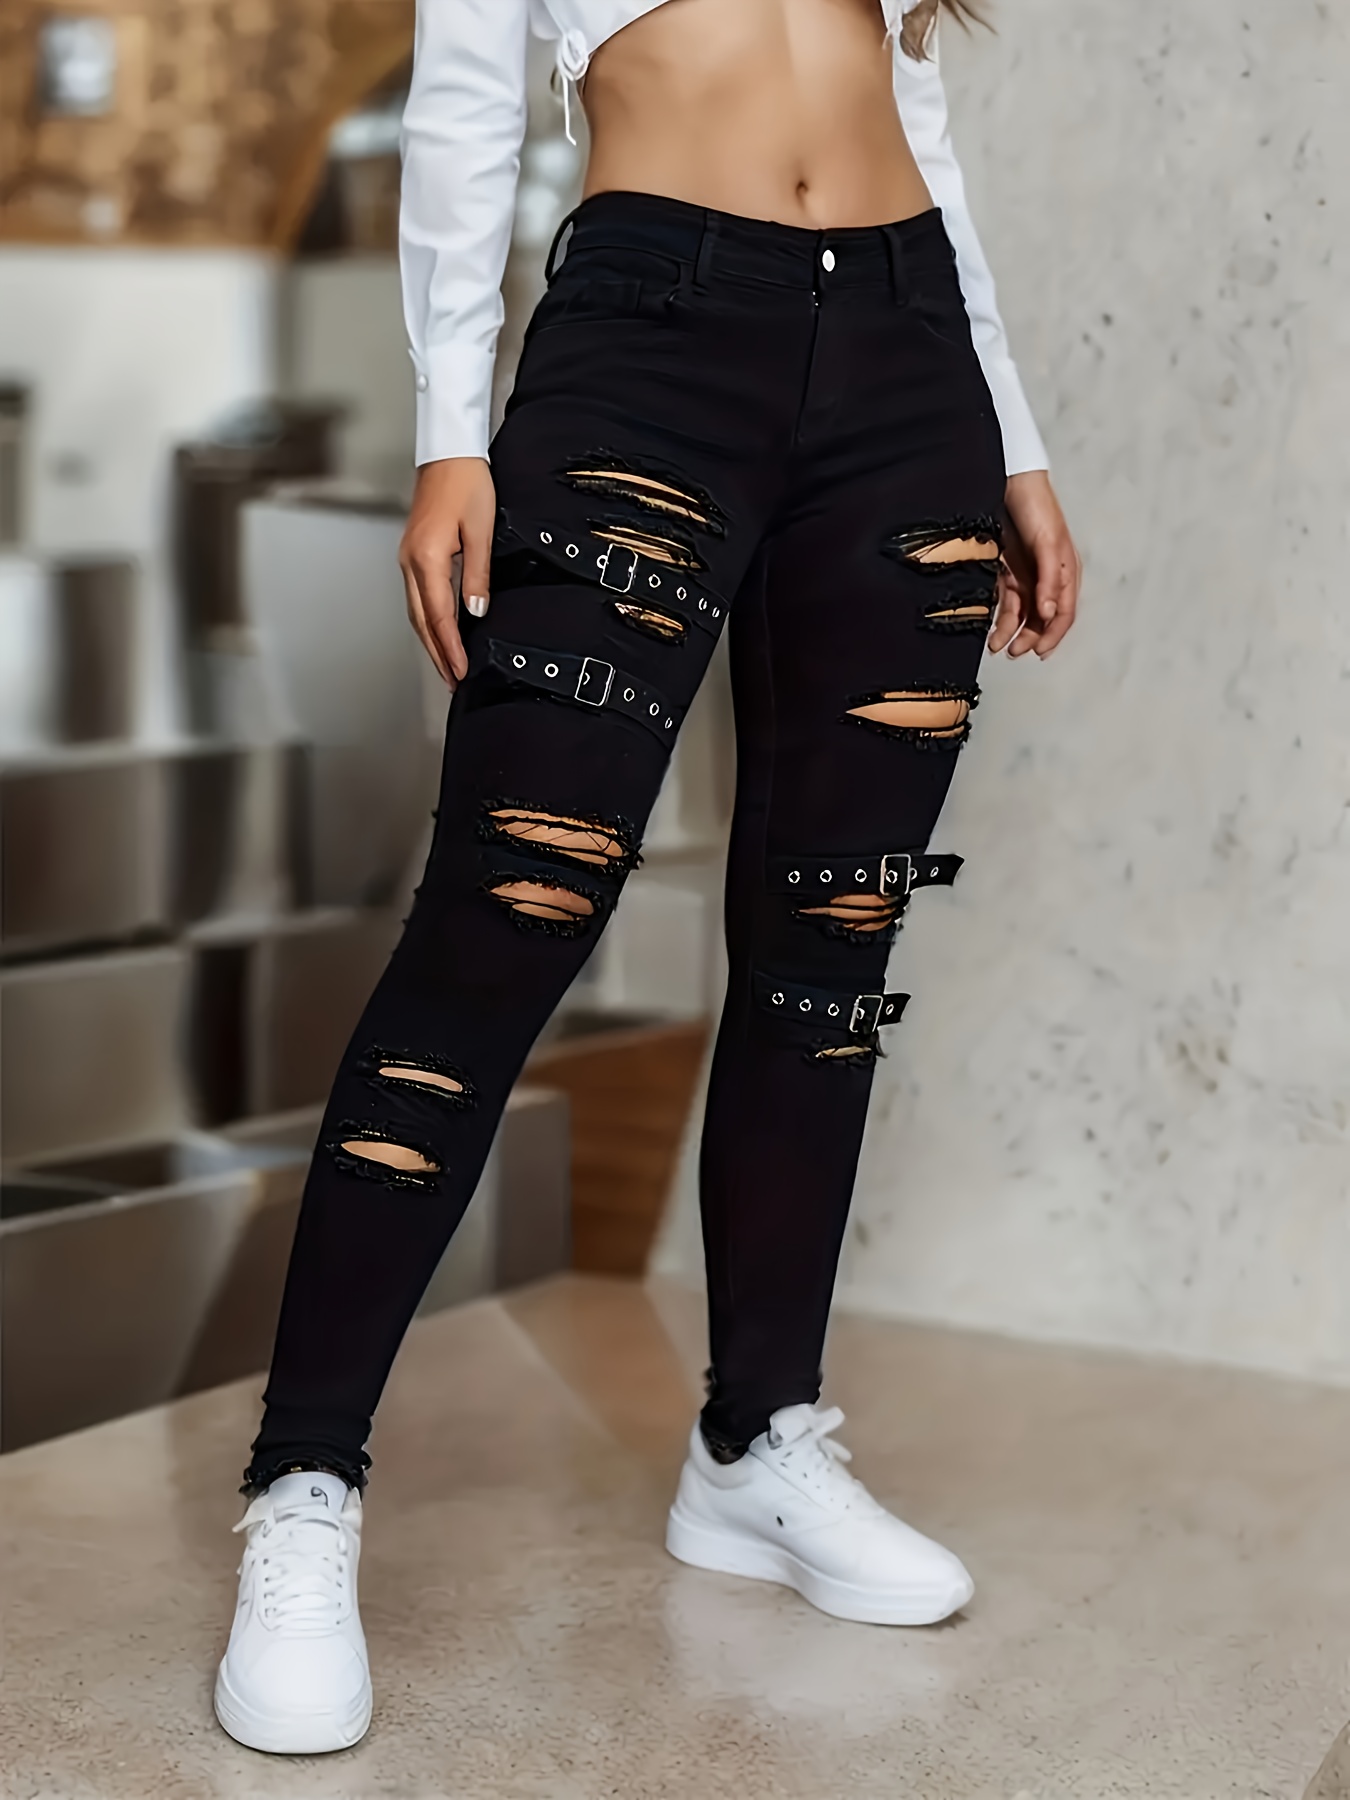 Ripped Holes Casual Skinny Jeans, High Waist Slim Fit Chic Tight Jeans,  Women's Denim Jeans & Clothing